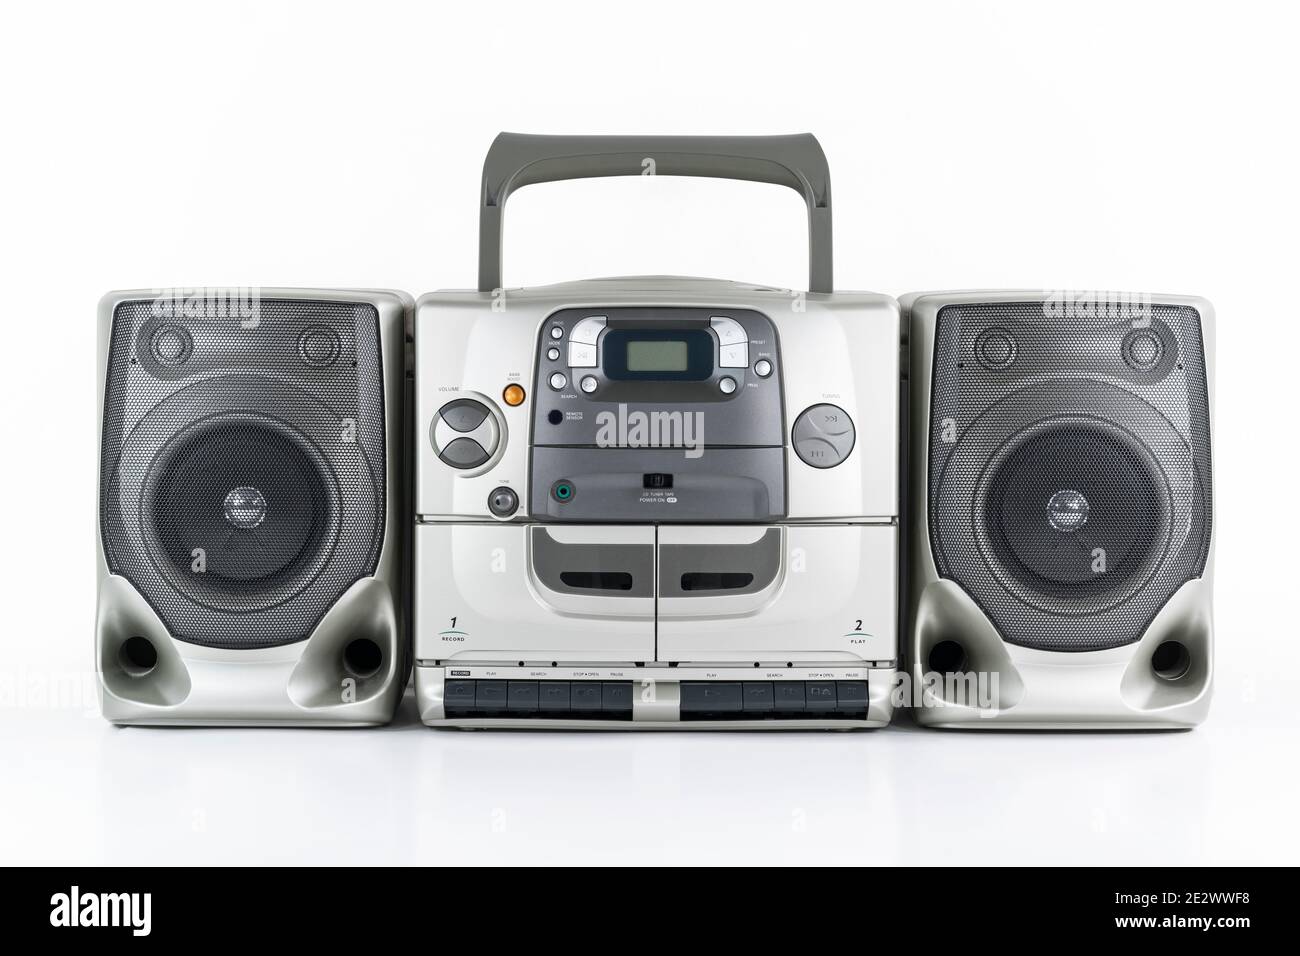 Vintage boom box style portable stereo radio, cd, cassette tape player and recorder on white. Stock Photo